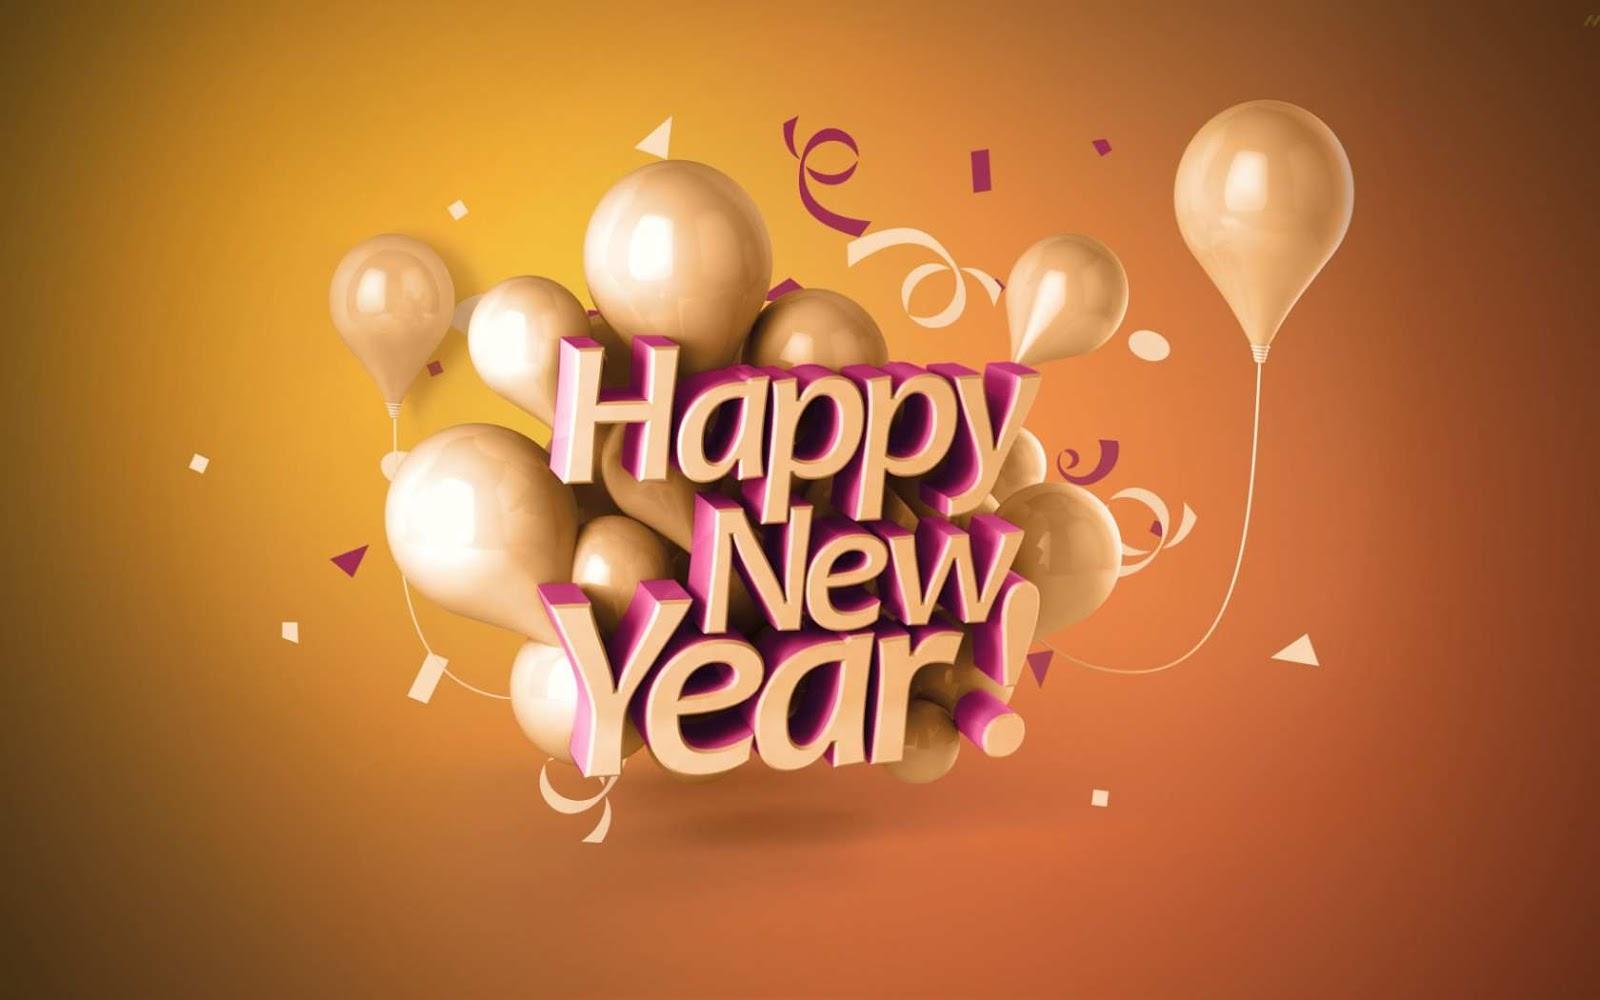 Happy New Year 2020 HD Wallpaper, Image, Picture